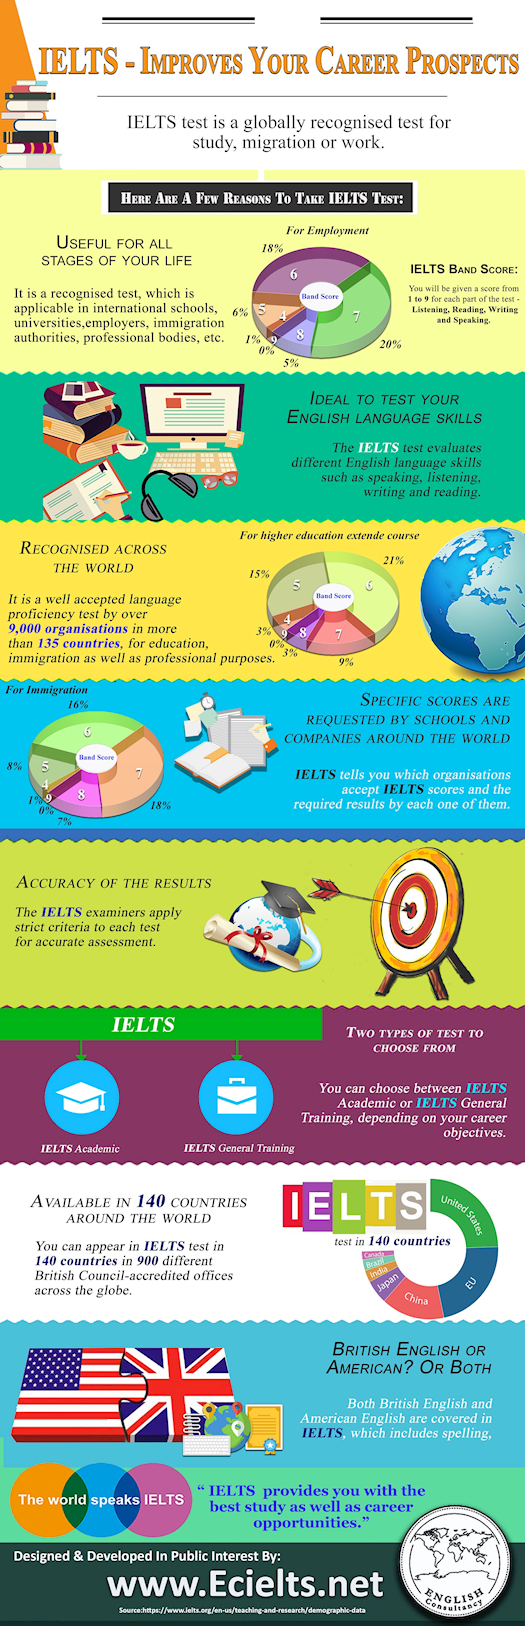 IELTS - Improves Your Career Prospects